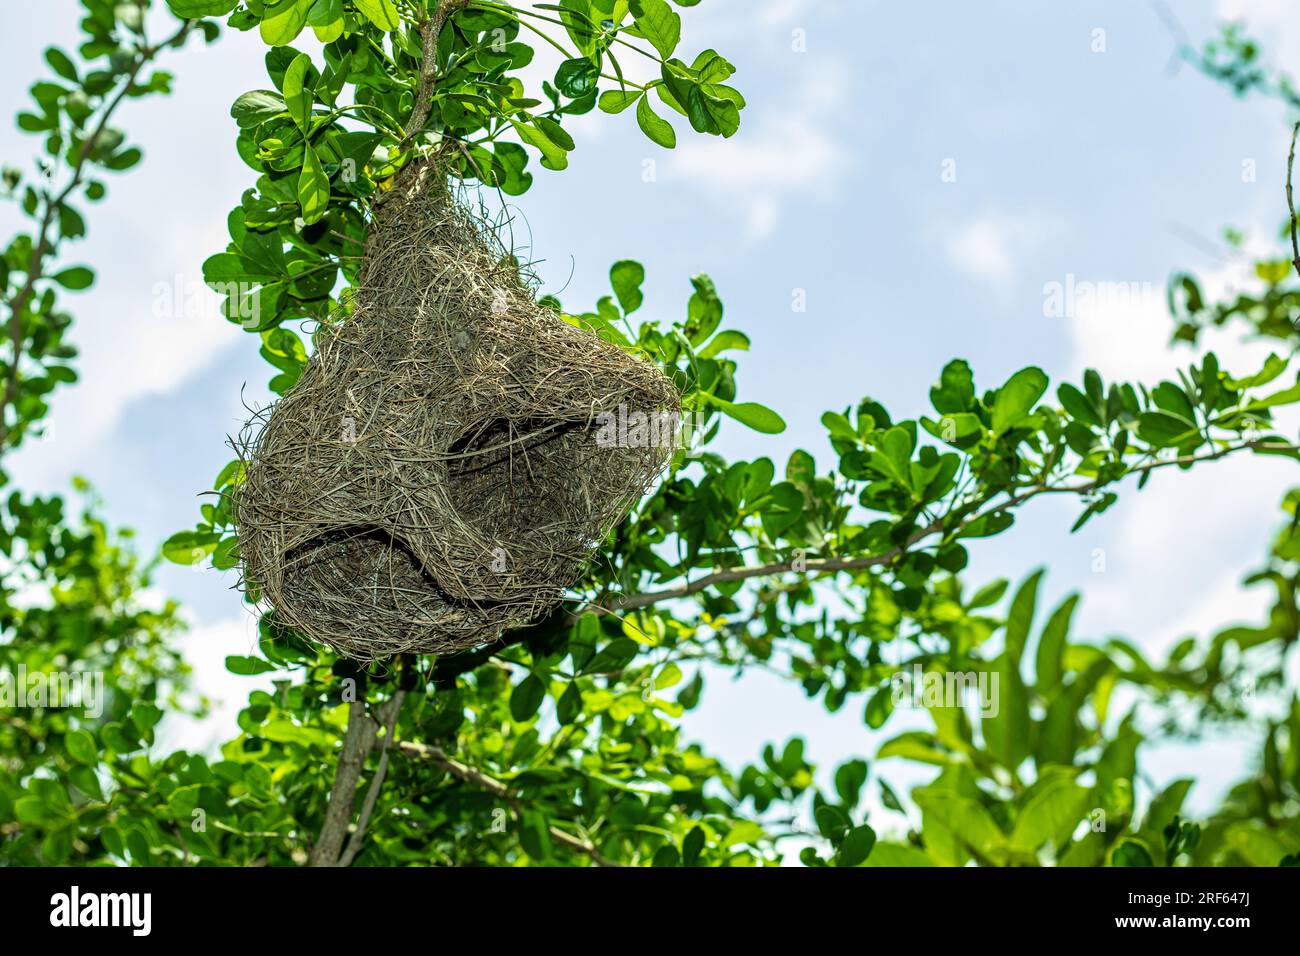 Weaver birds make their nests with various materials, depending on